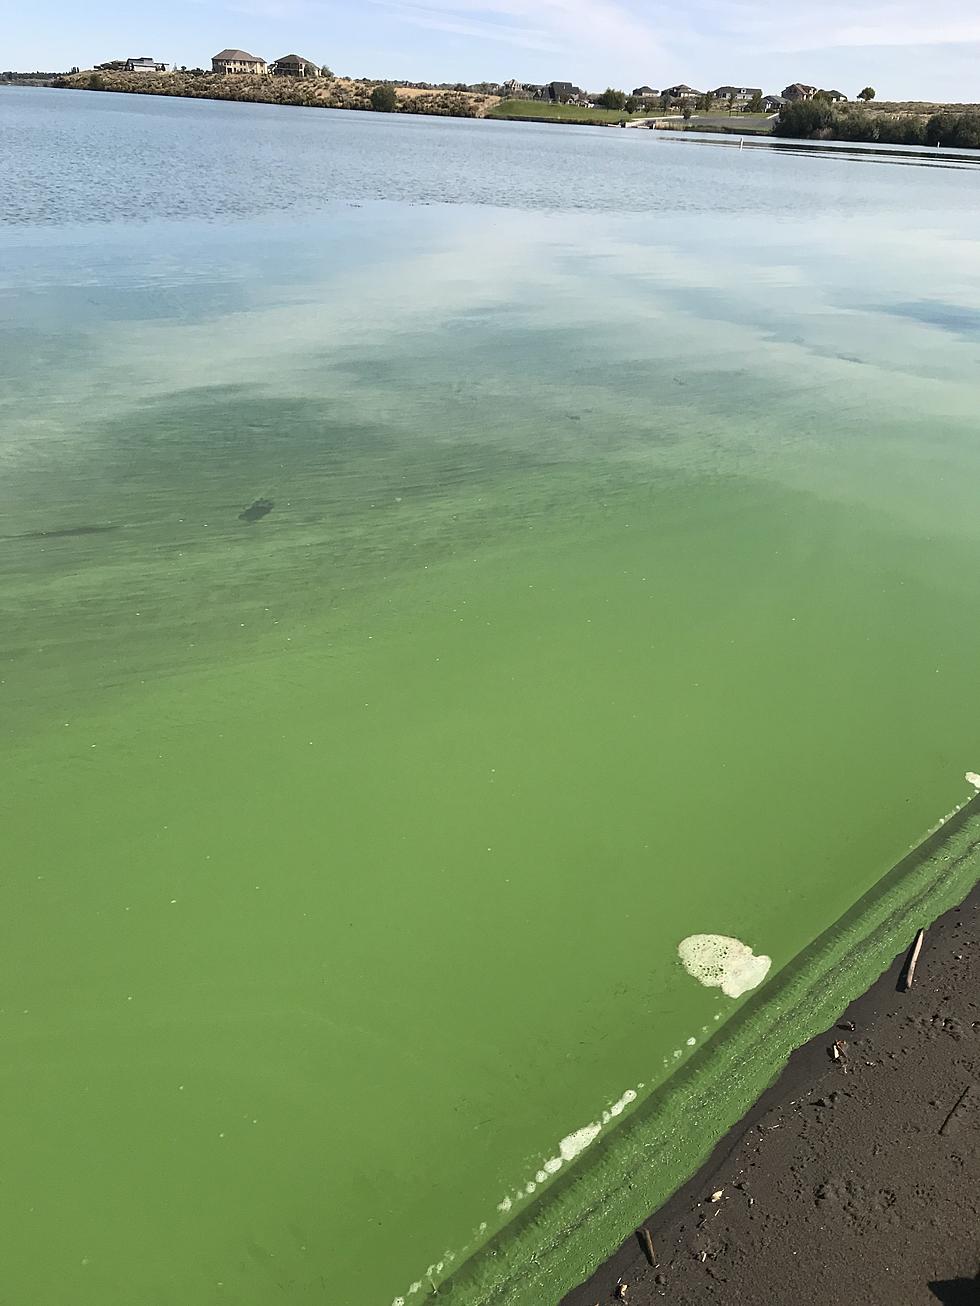 Toxic Algae Found in Lake - Officials Warn Stay Away Until Clear